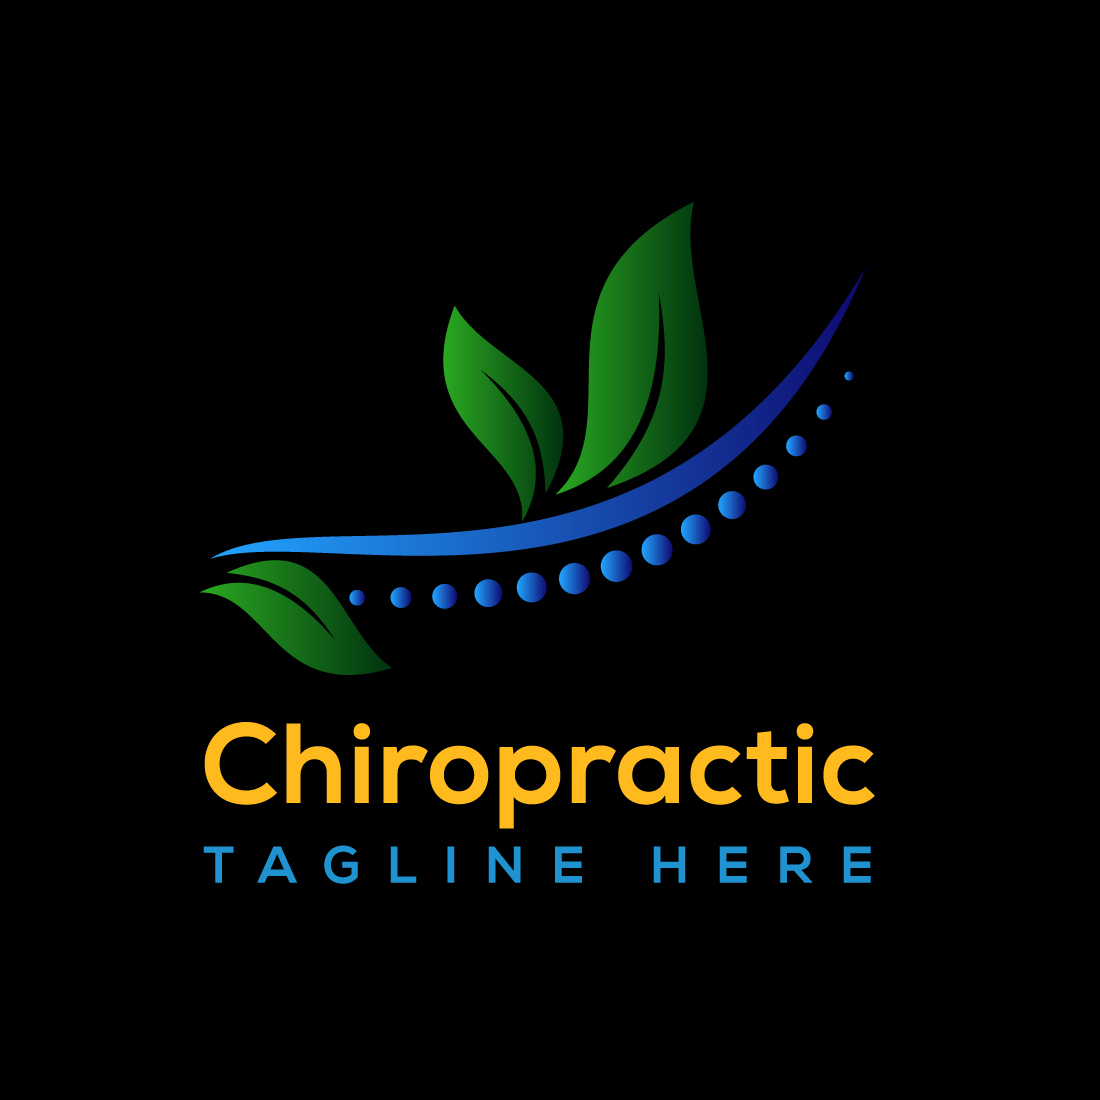 Chiropractic Medical Logo Design Template cover image.